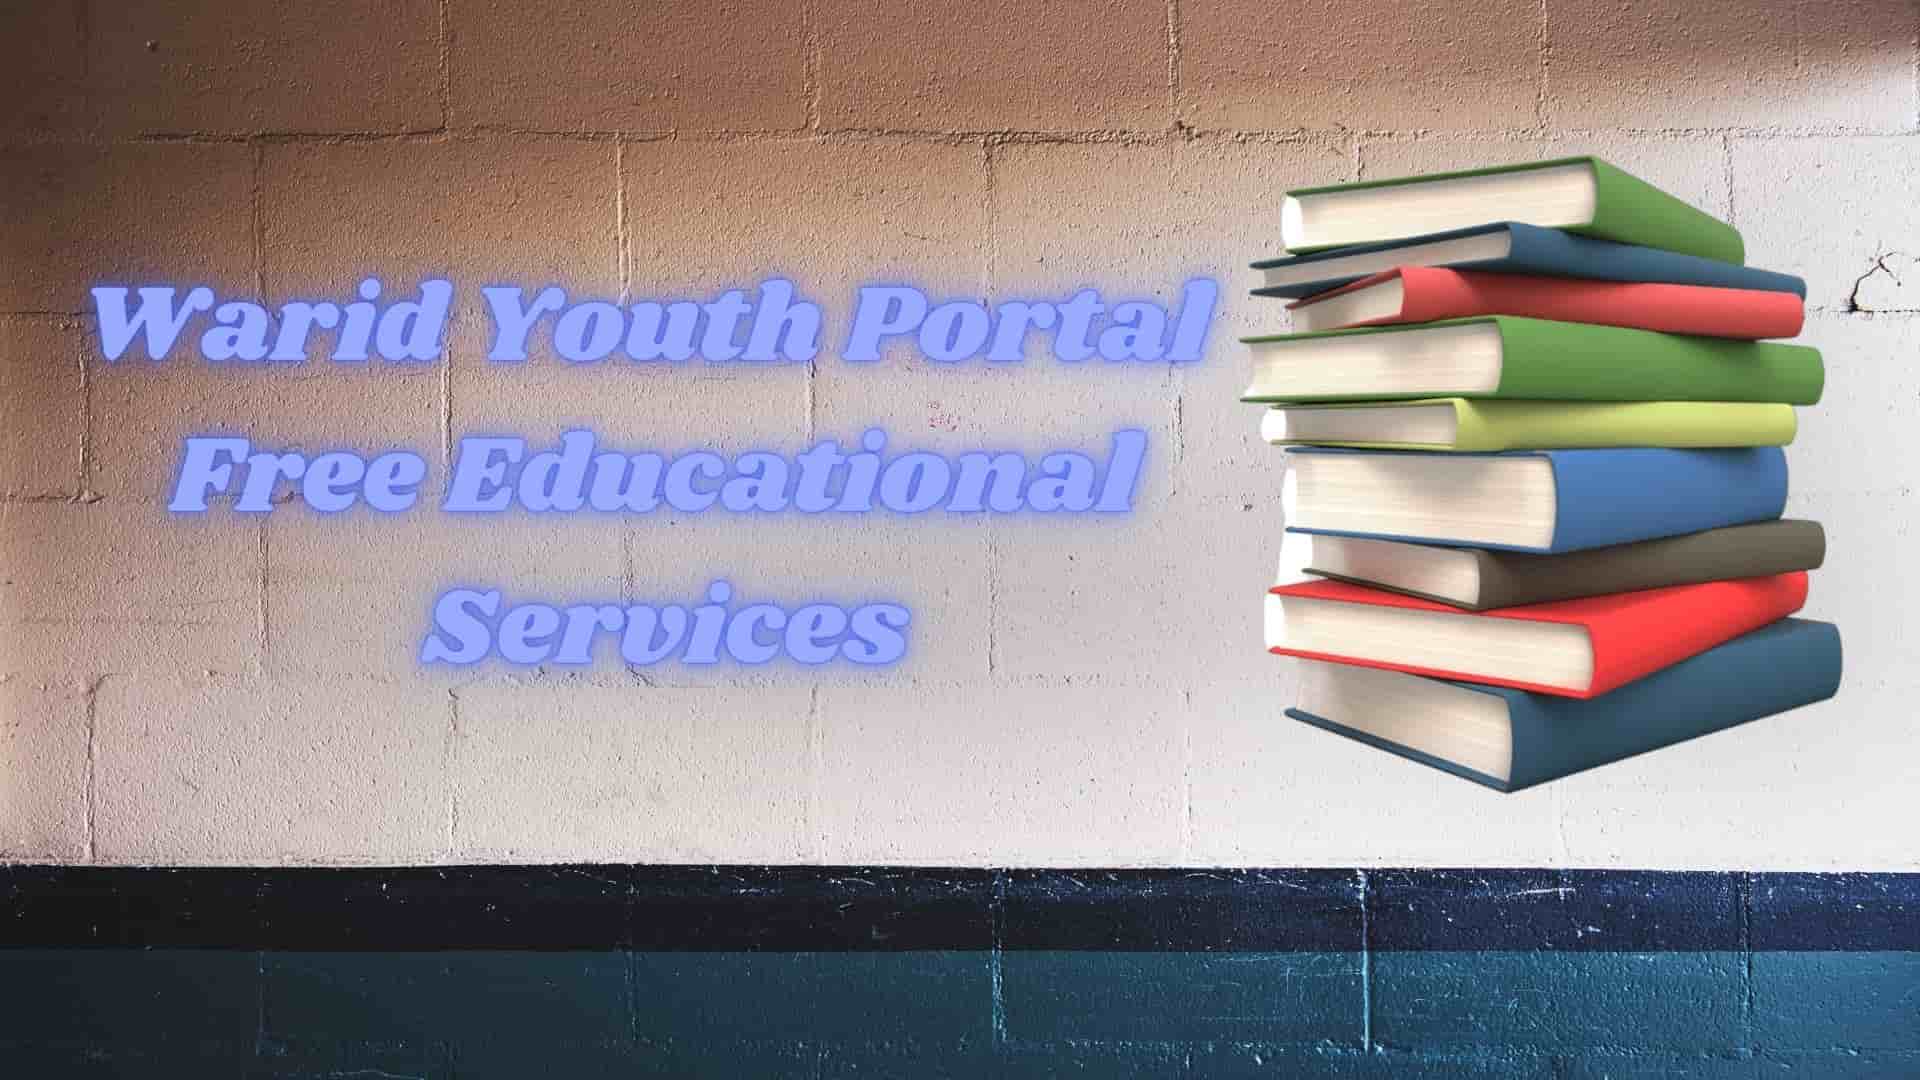 Warid Youth Portal Free Educational Services Latest